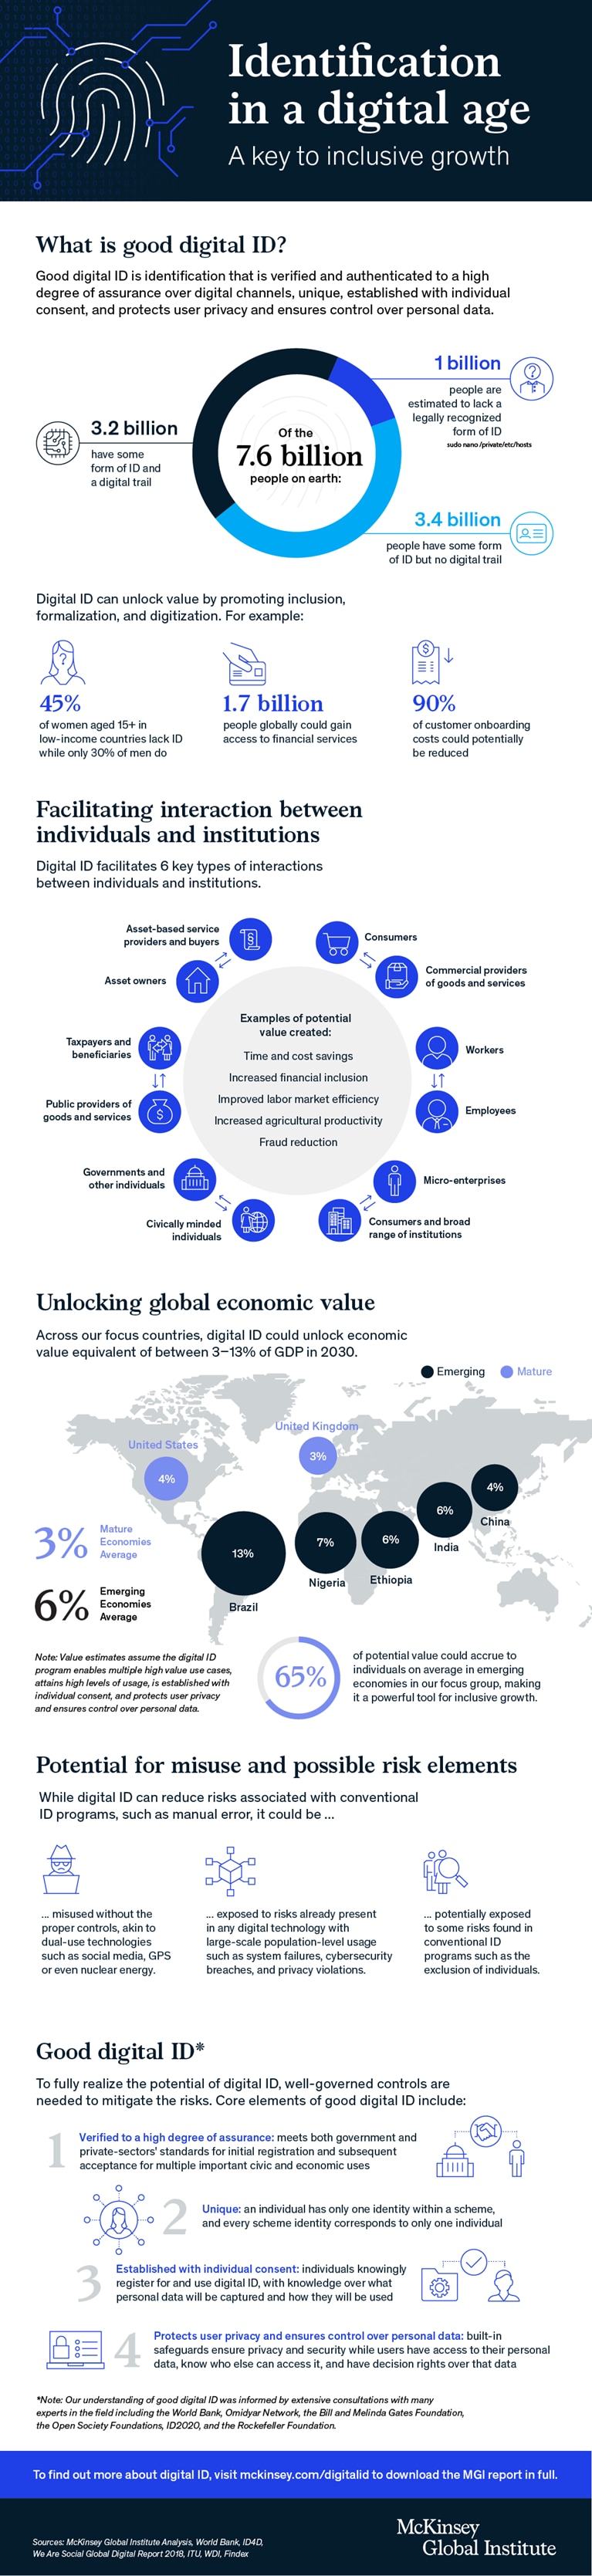 Infographic: What is good digital ID